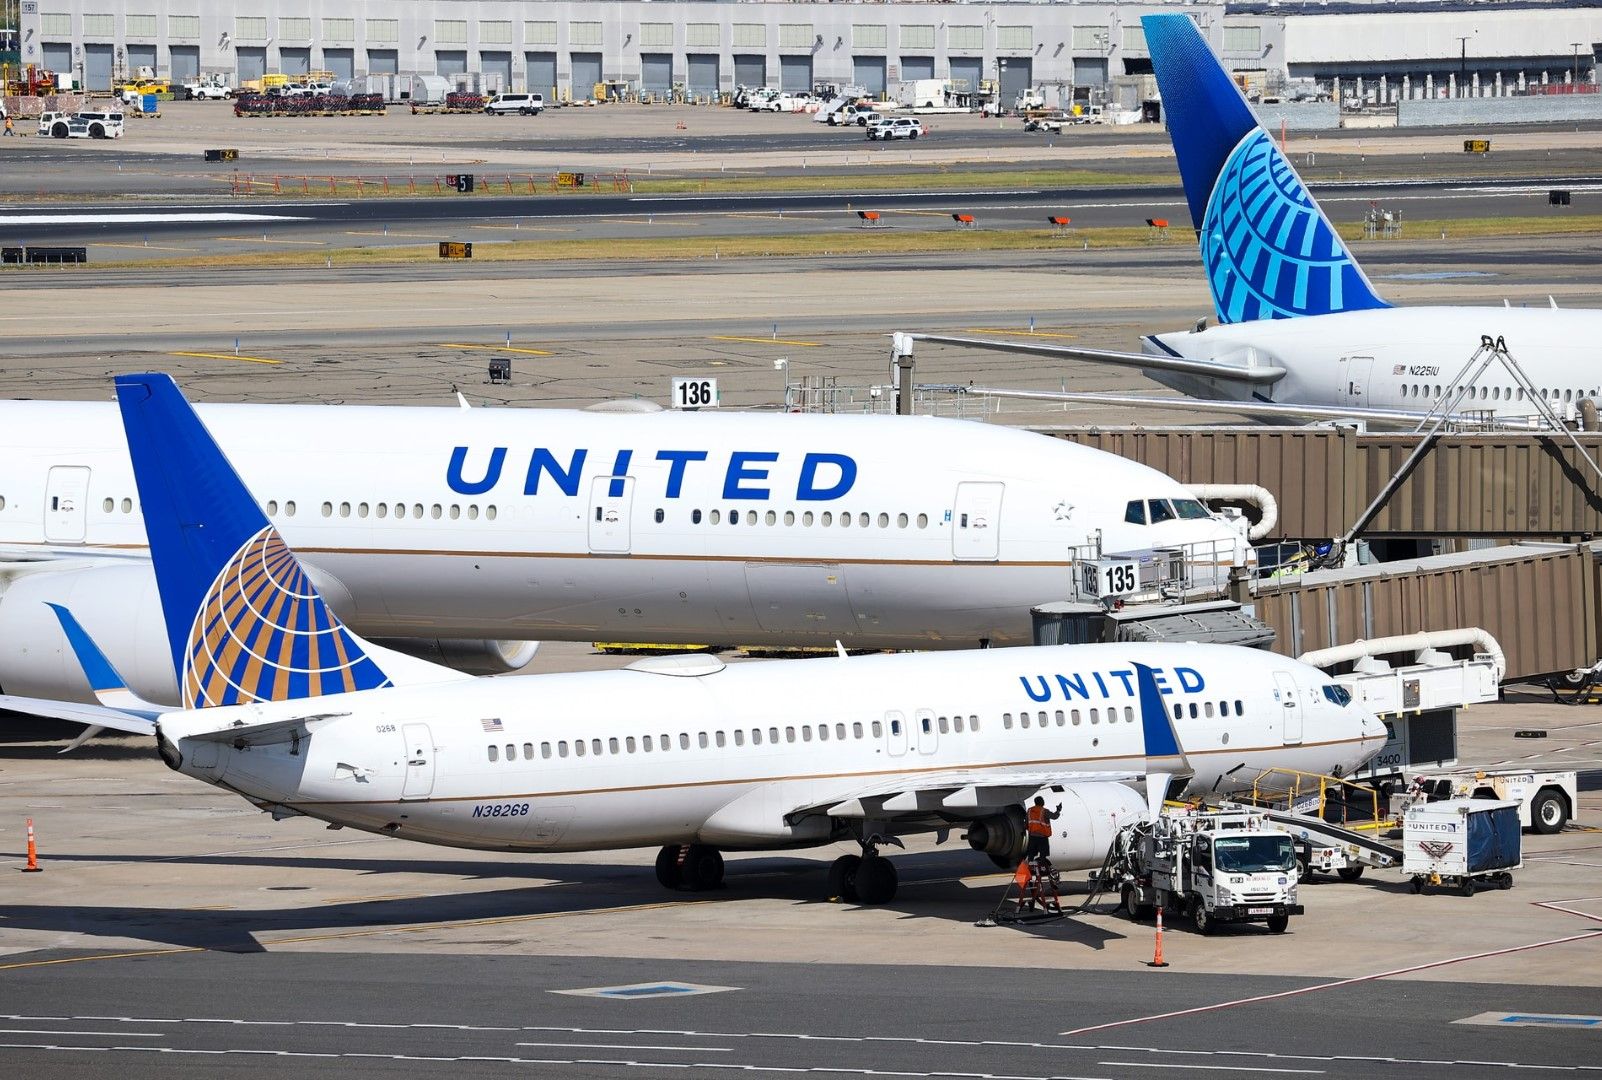 United Airlines 2Q profit of $329M misses Wall Street target